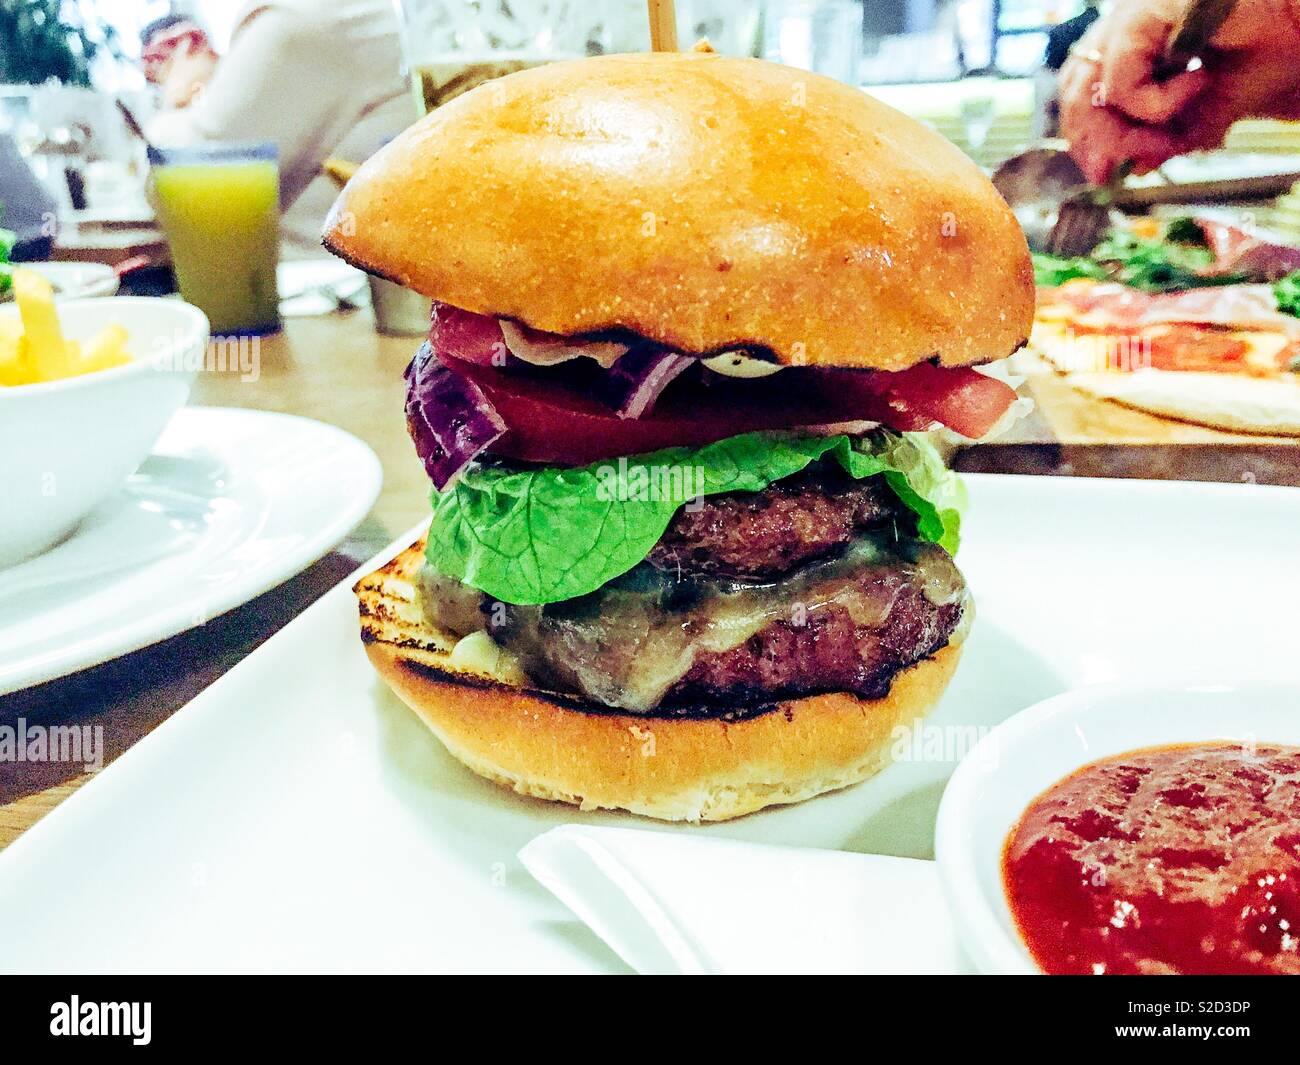 Big juicy and Tasty double half pound cheeseburger on a white plate in a restaurant Stock Photo